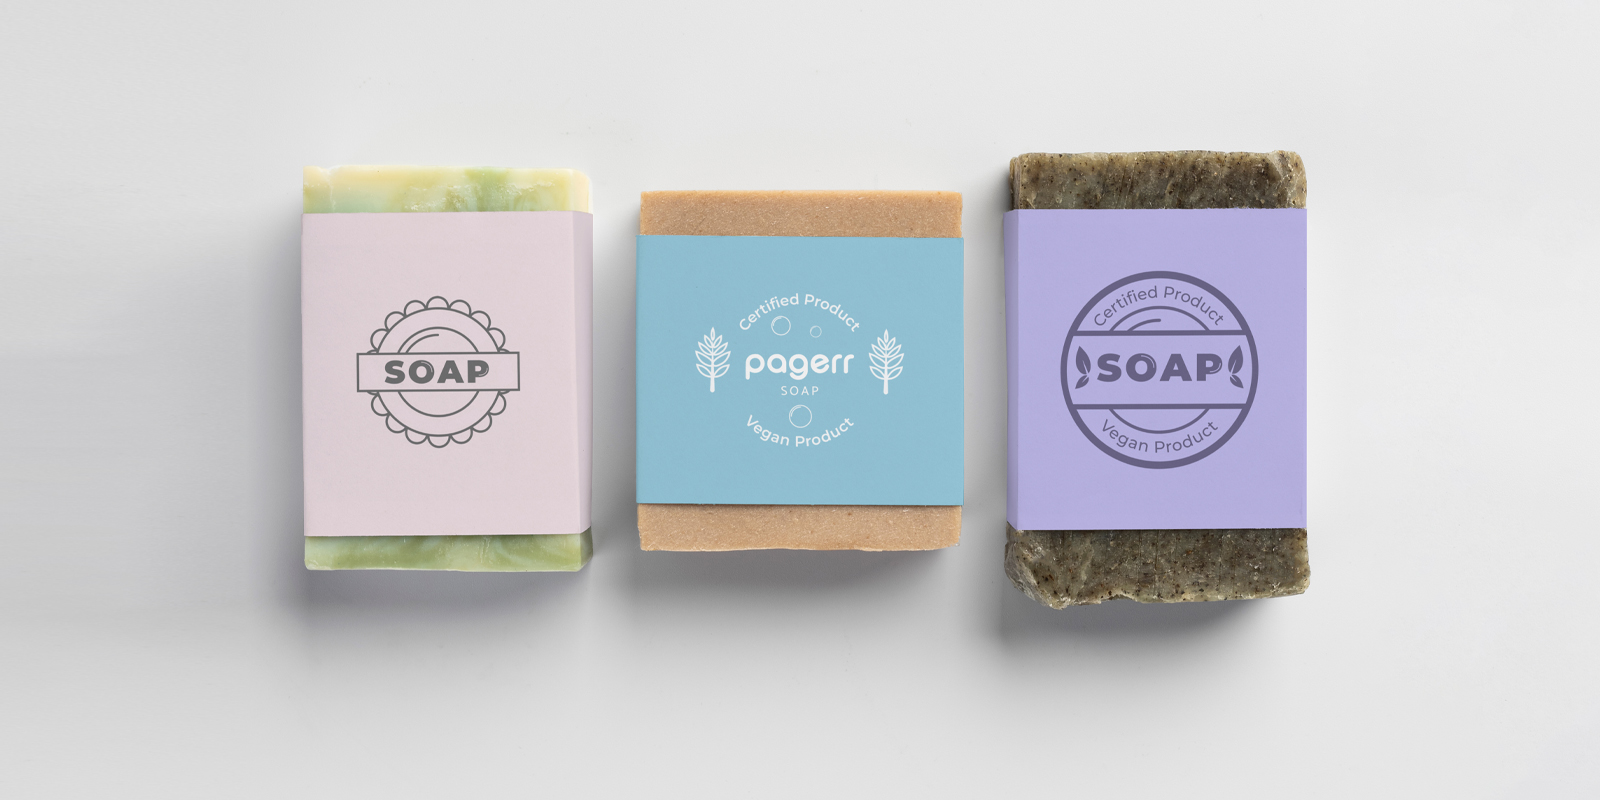 Soap labels in Hamburg - Print with Pagerr